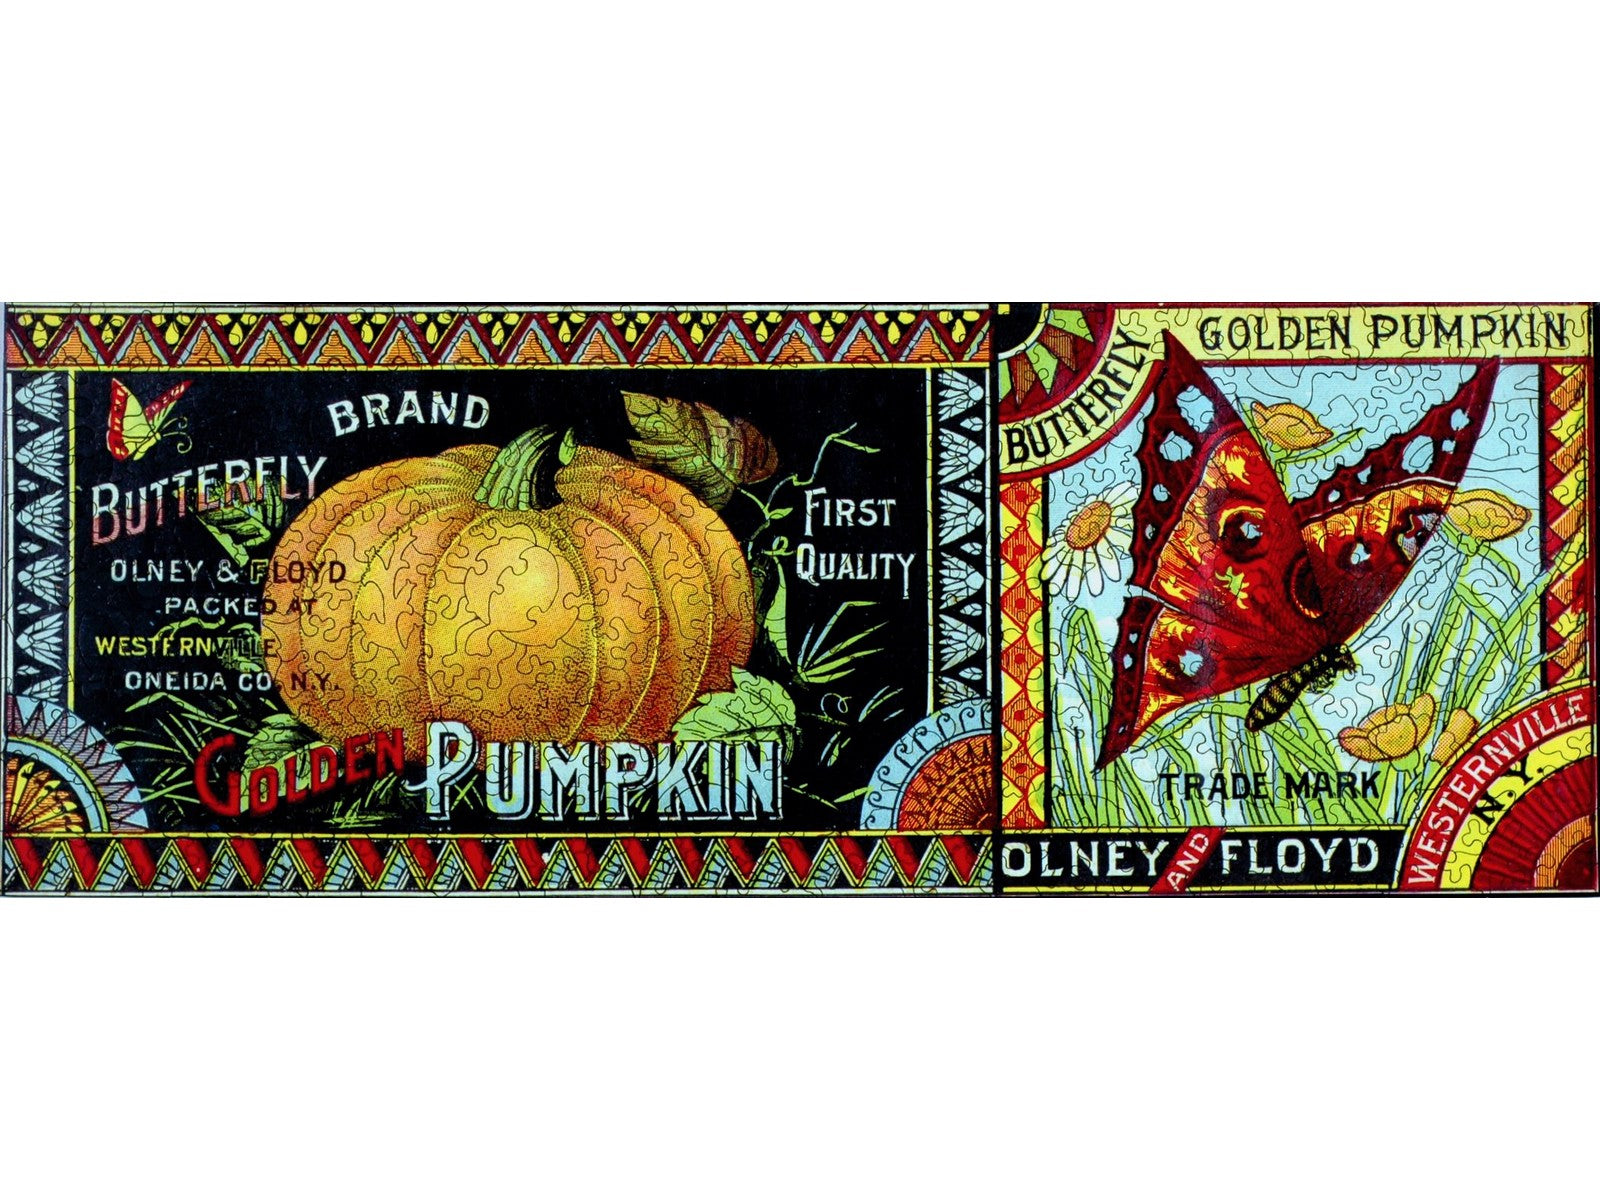 The front of the puzzle, Butterfly Golden Pumpkin, which shows a pumpkin and a butterfly with a decorative border.